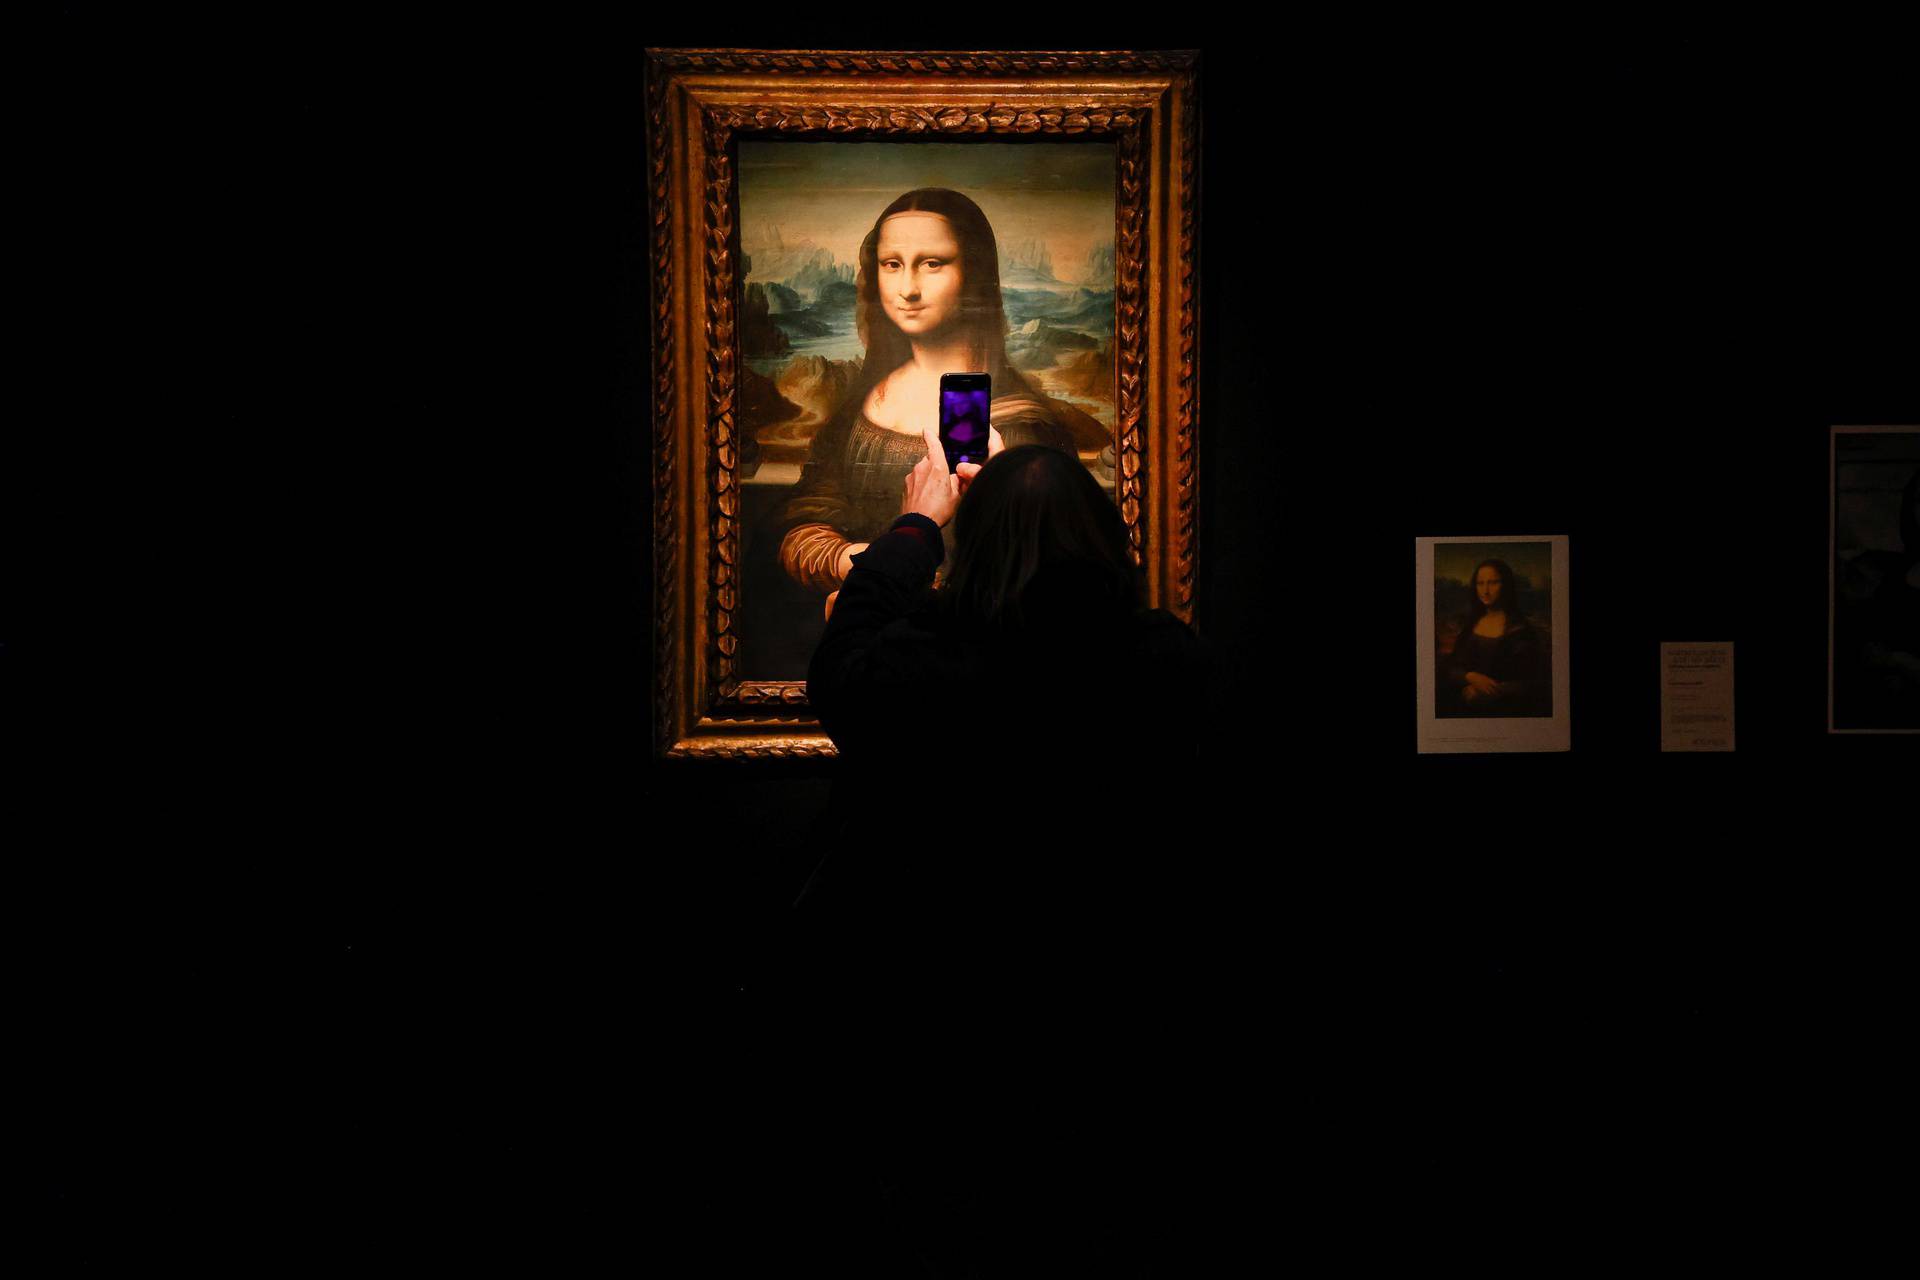 A visitor takes a photo of a copy of the Leonardo da Vinci's Mona Lisa, which will go up for auction on November 9, at the Artcurial auction house in Paris